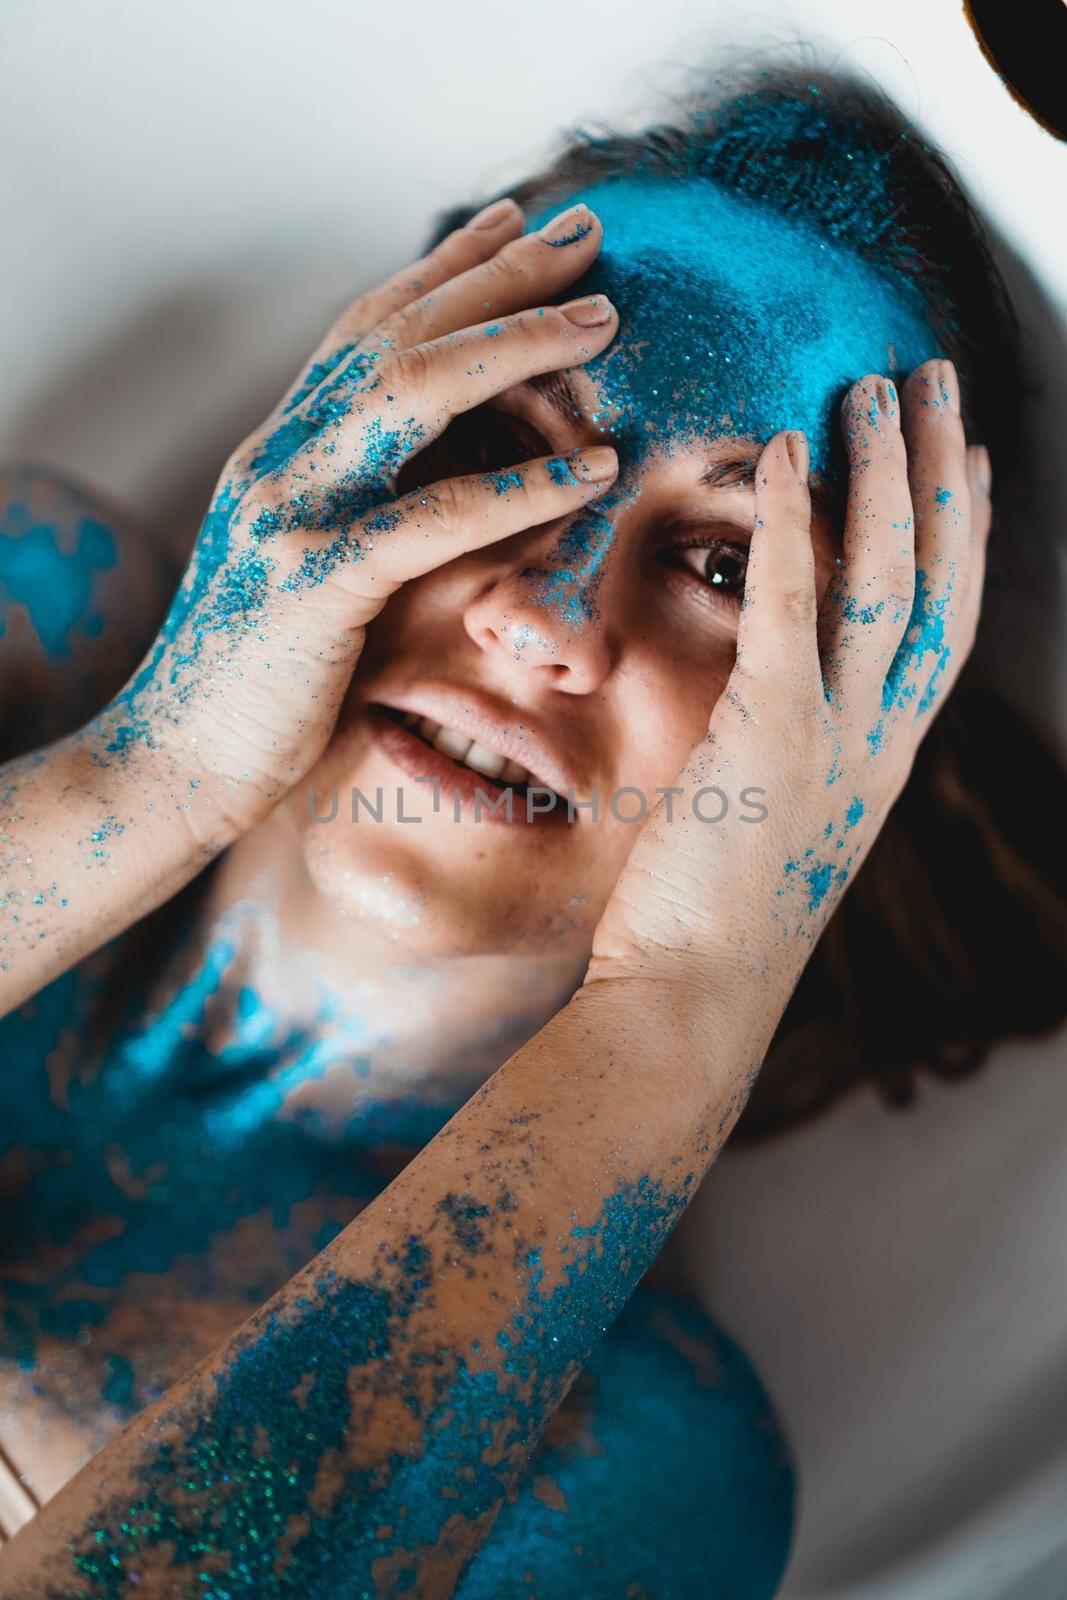 Portrait of beautiful woman with blue sparkles on her face in the bath. The concept of Individuality